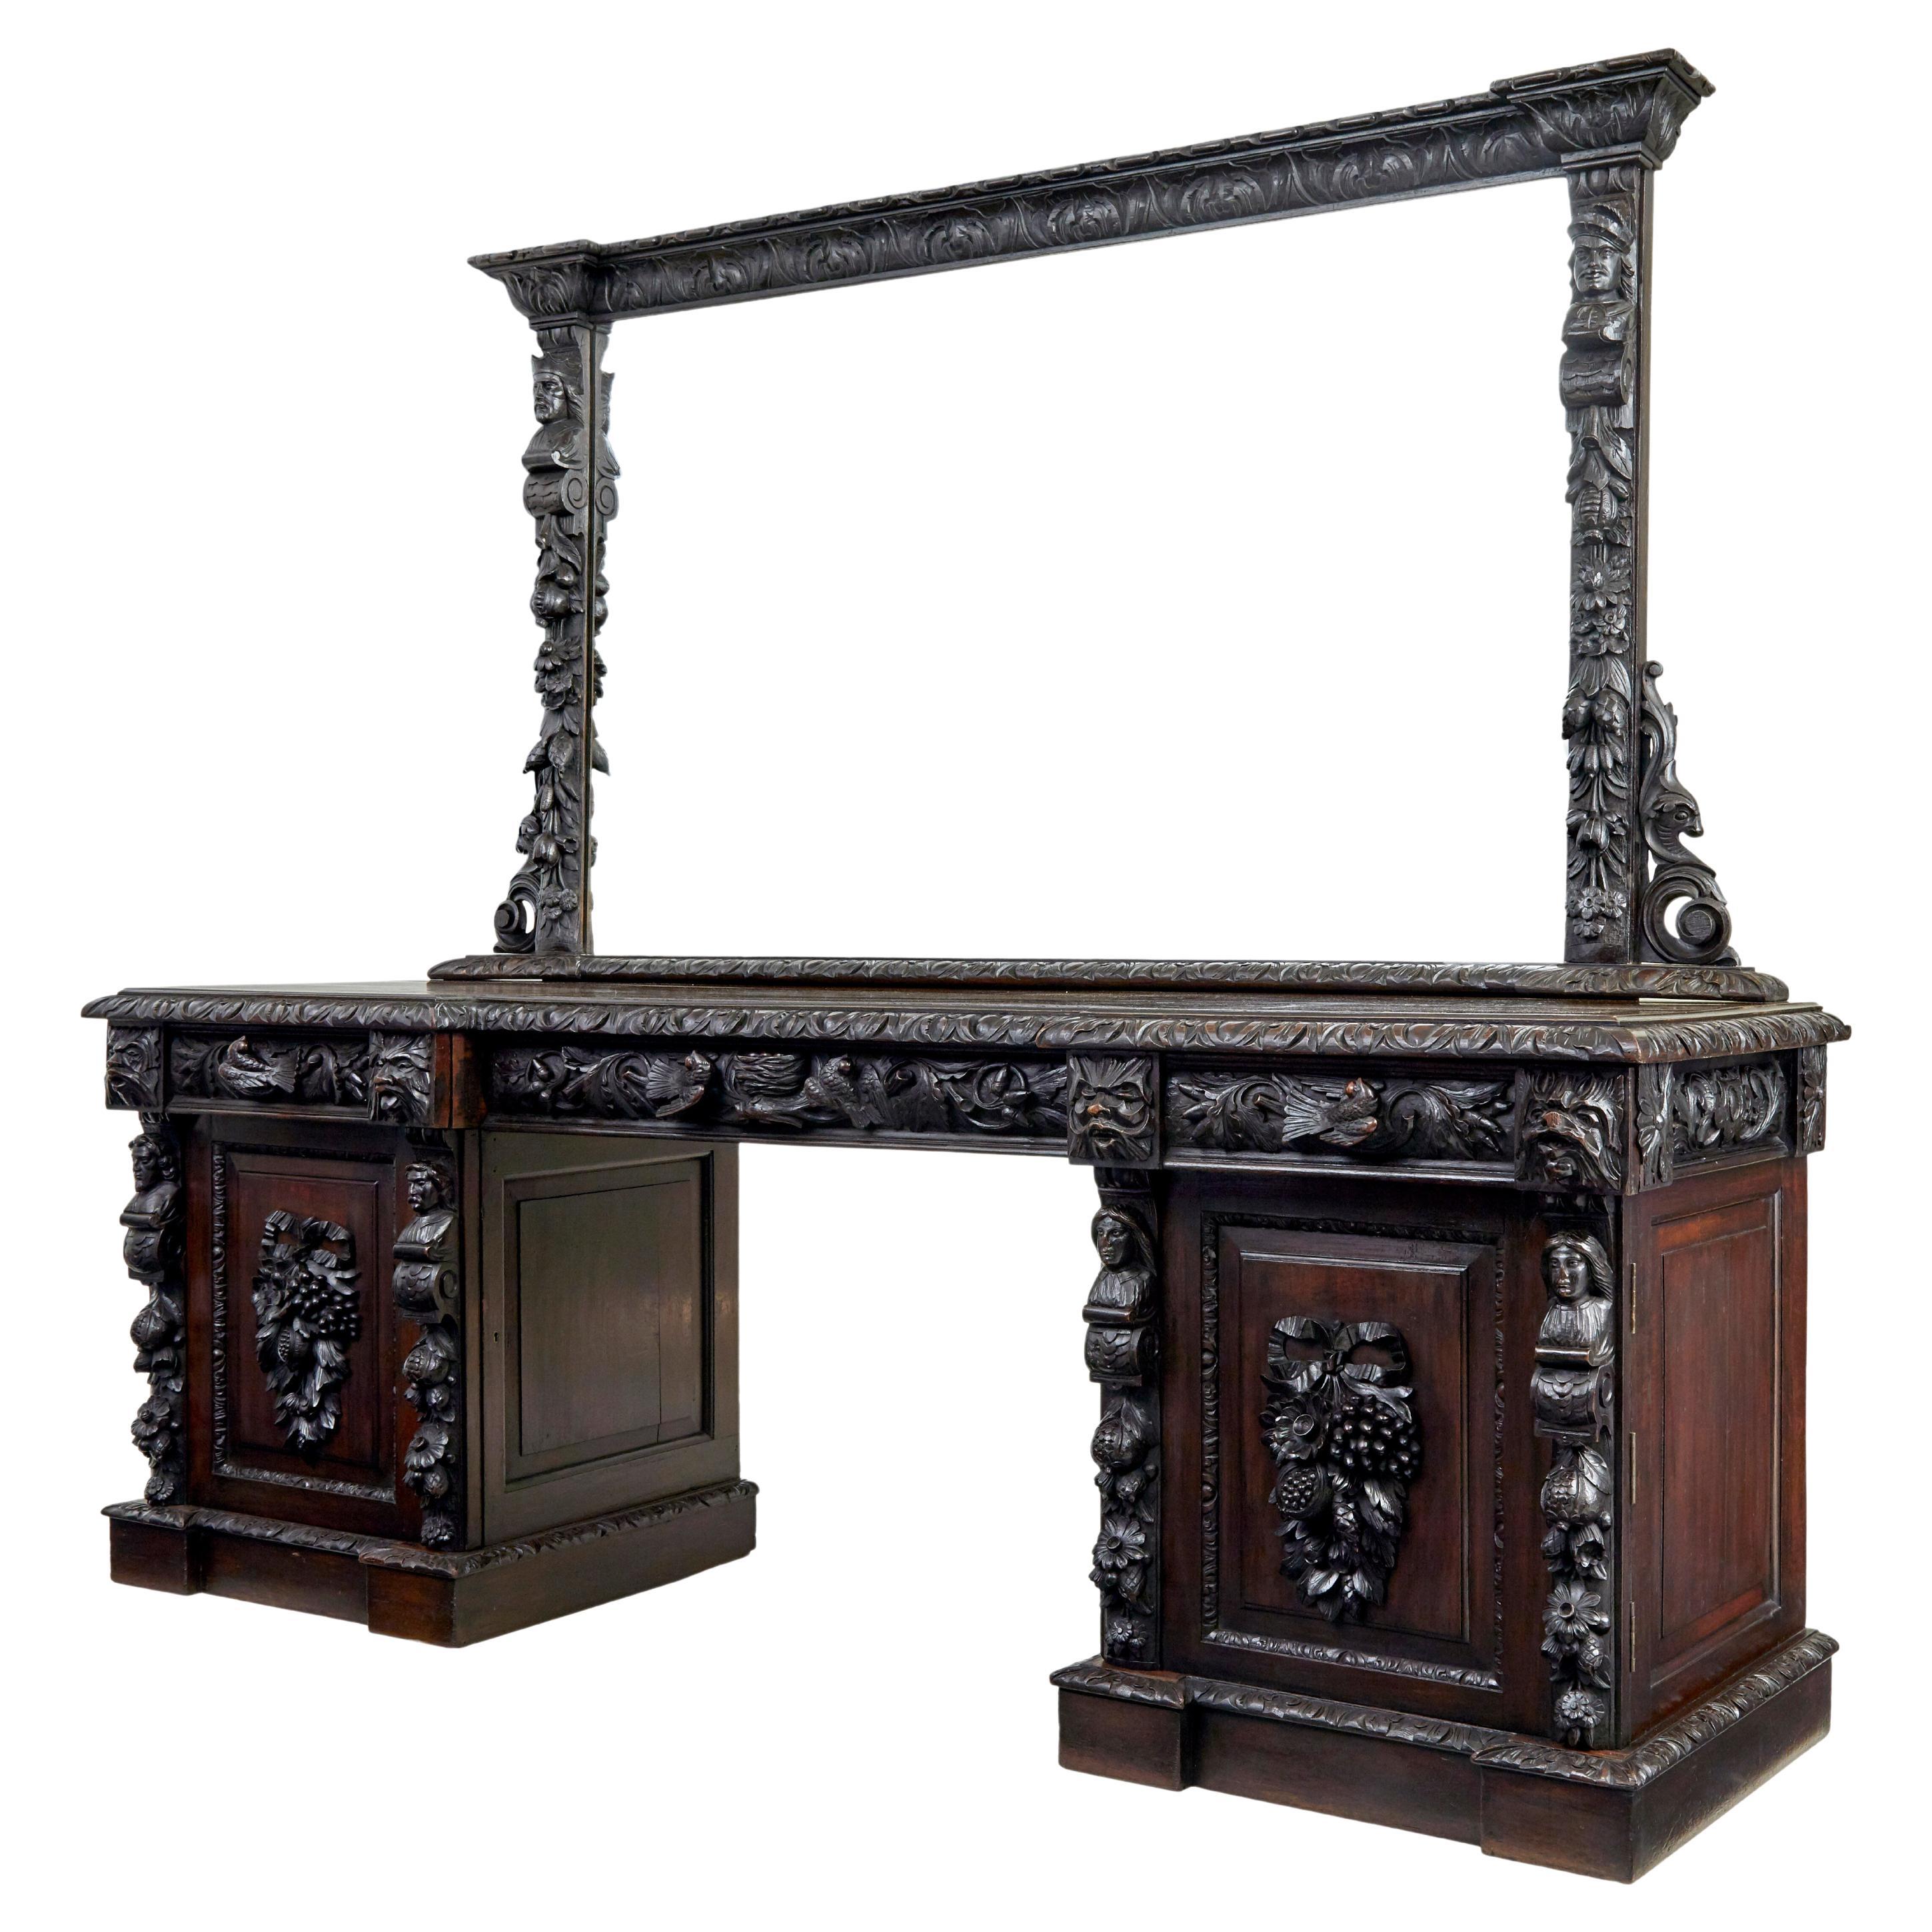 19th century carved oak mirrored sideboard of grand proportions